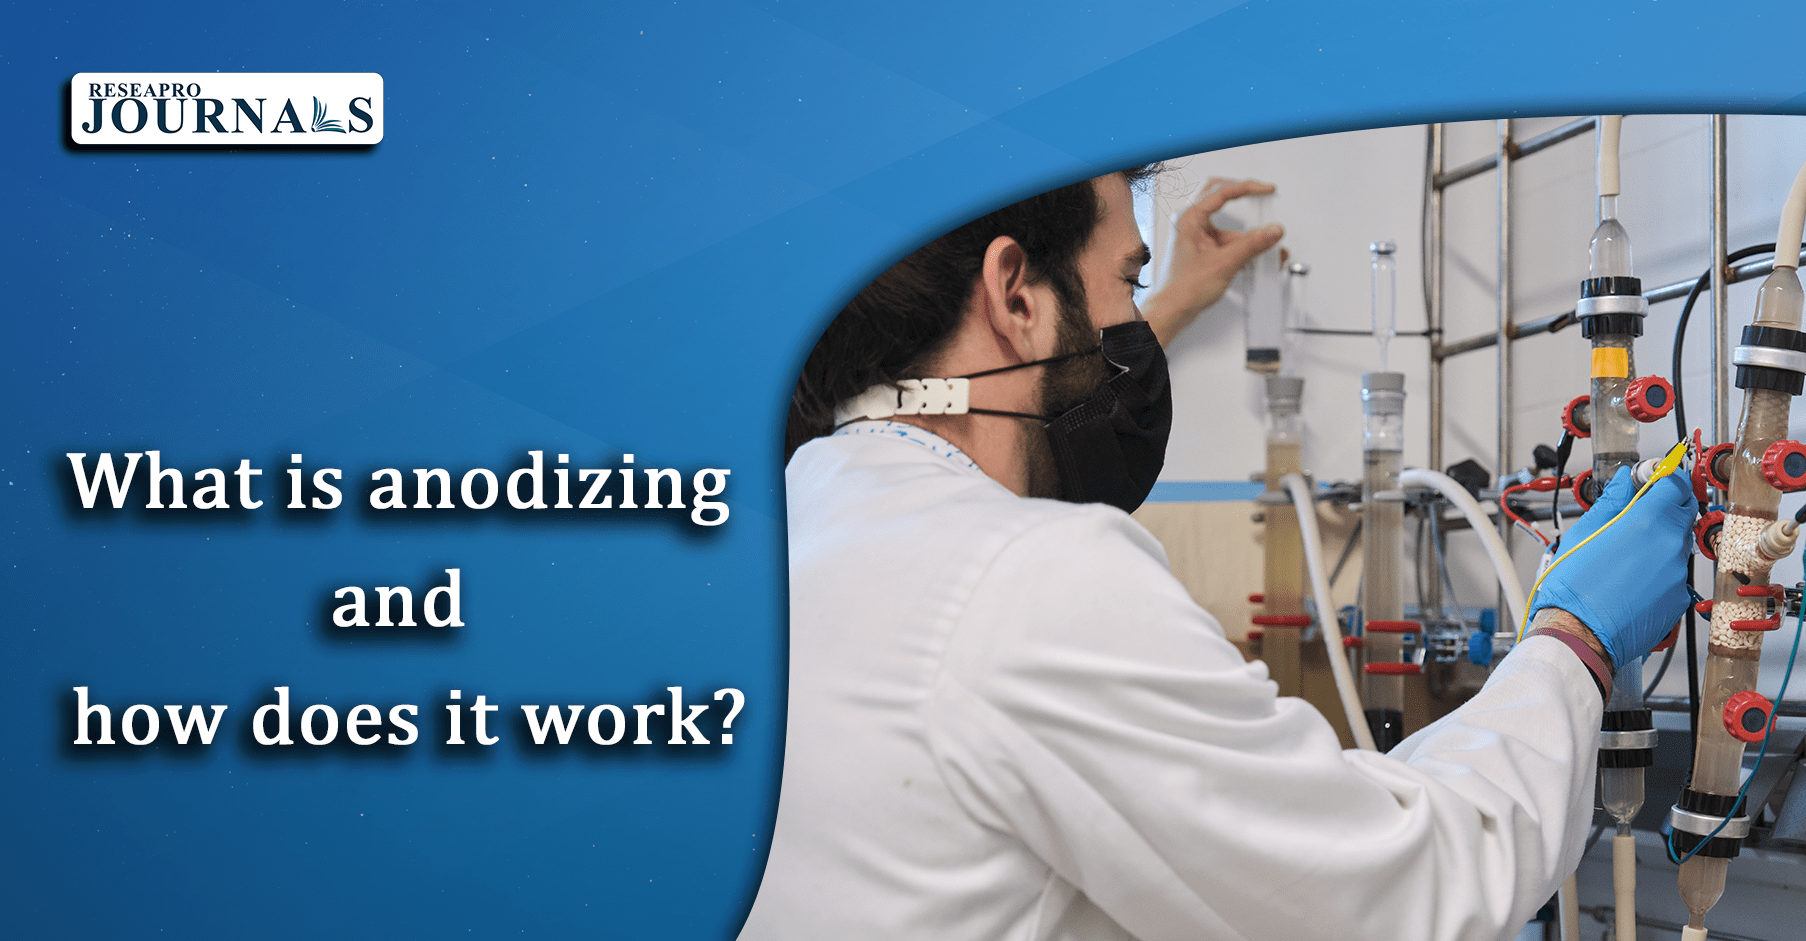 What is anodizing and how does it work?